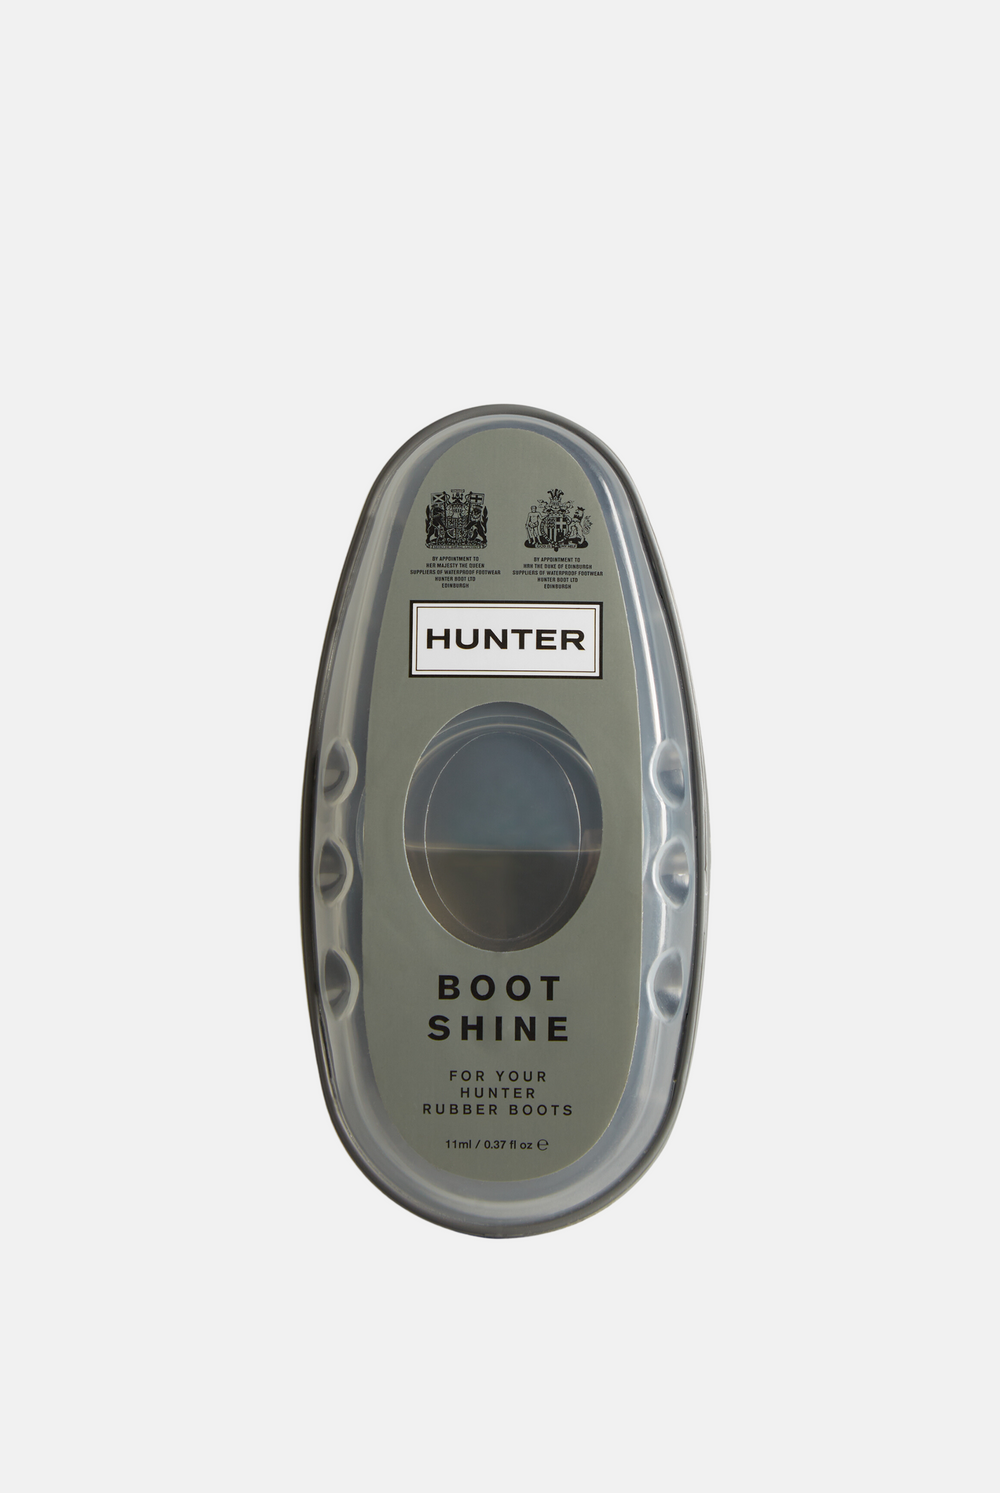 Rubber Boot Care Kit